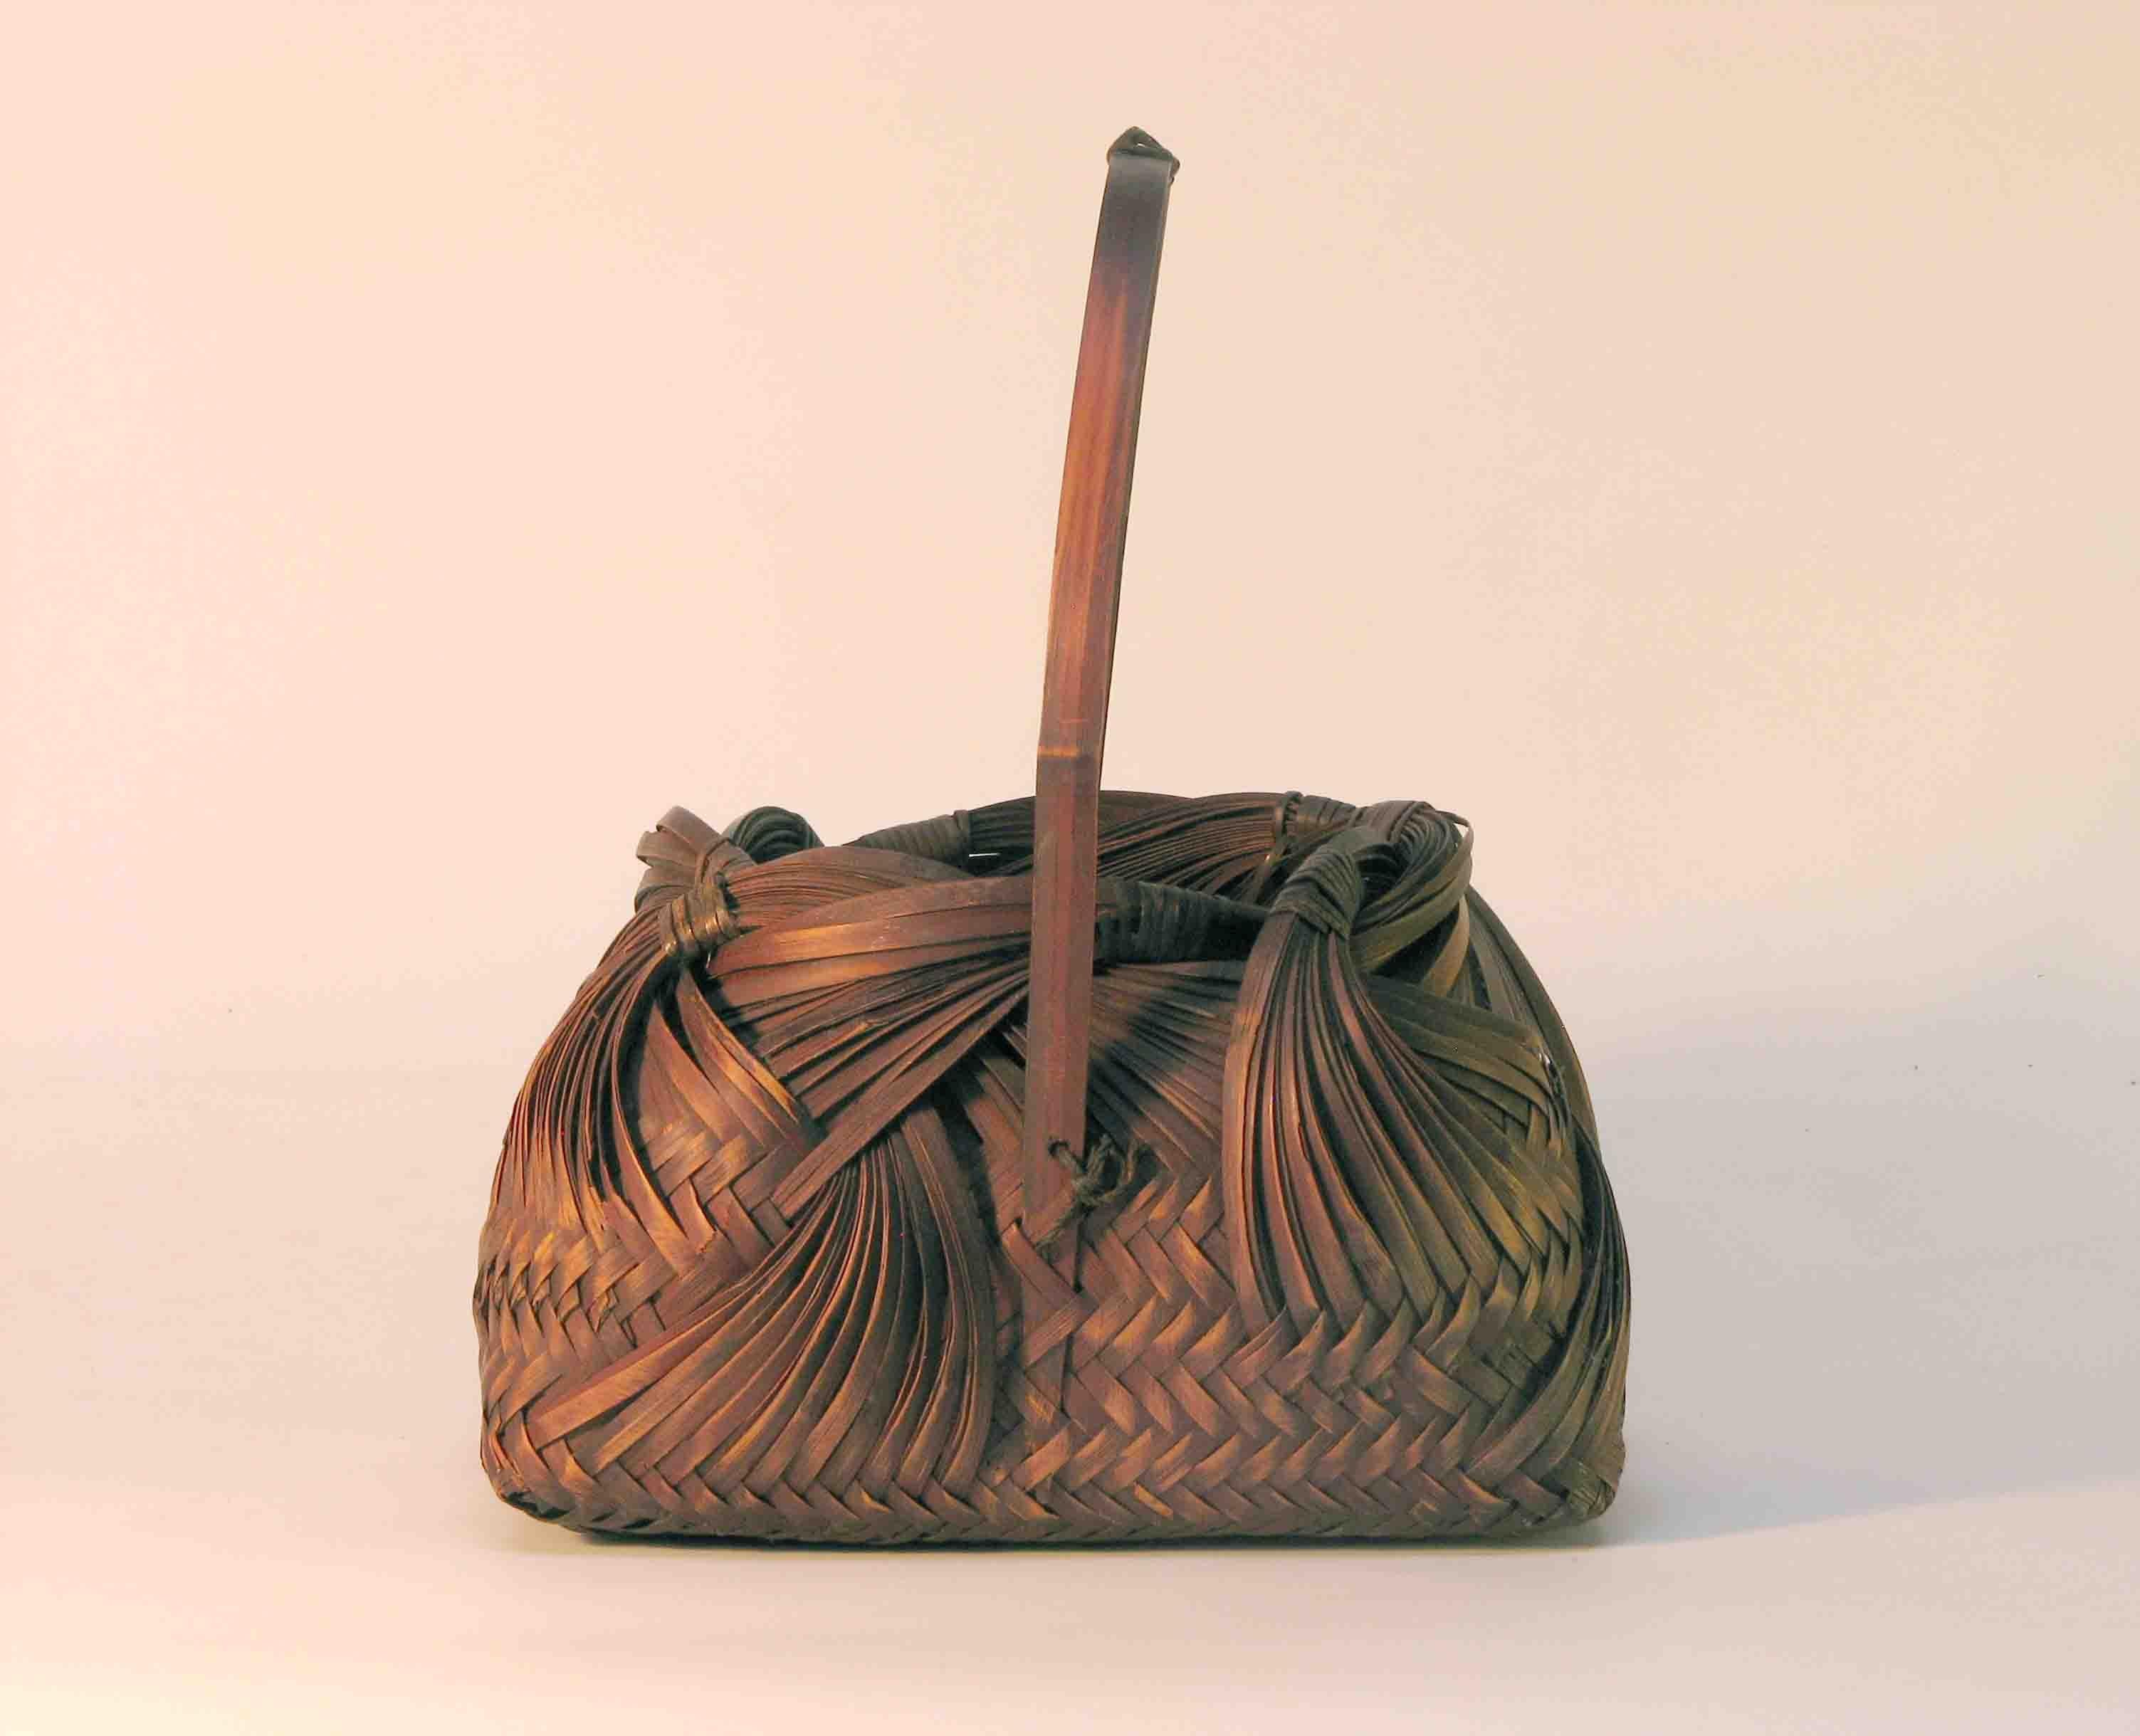 Hand-Crafted Japanese Woven Bamboo Ikebana Flower Basket Early 20th Century